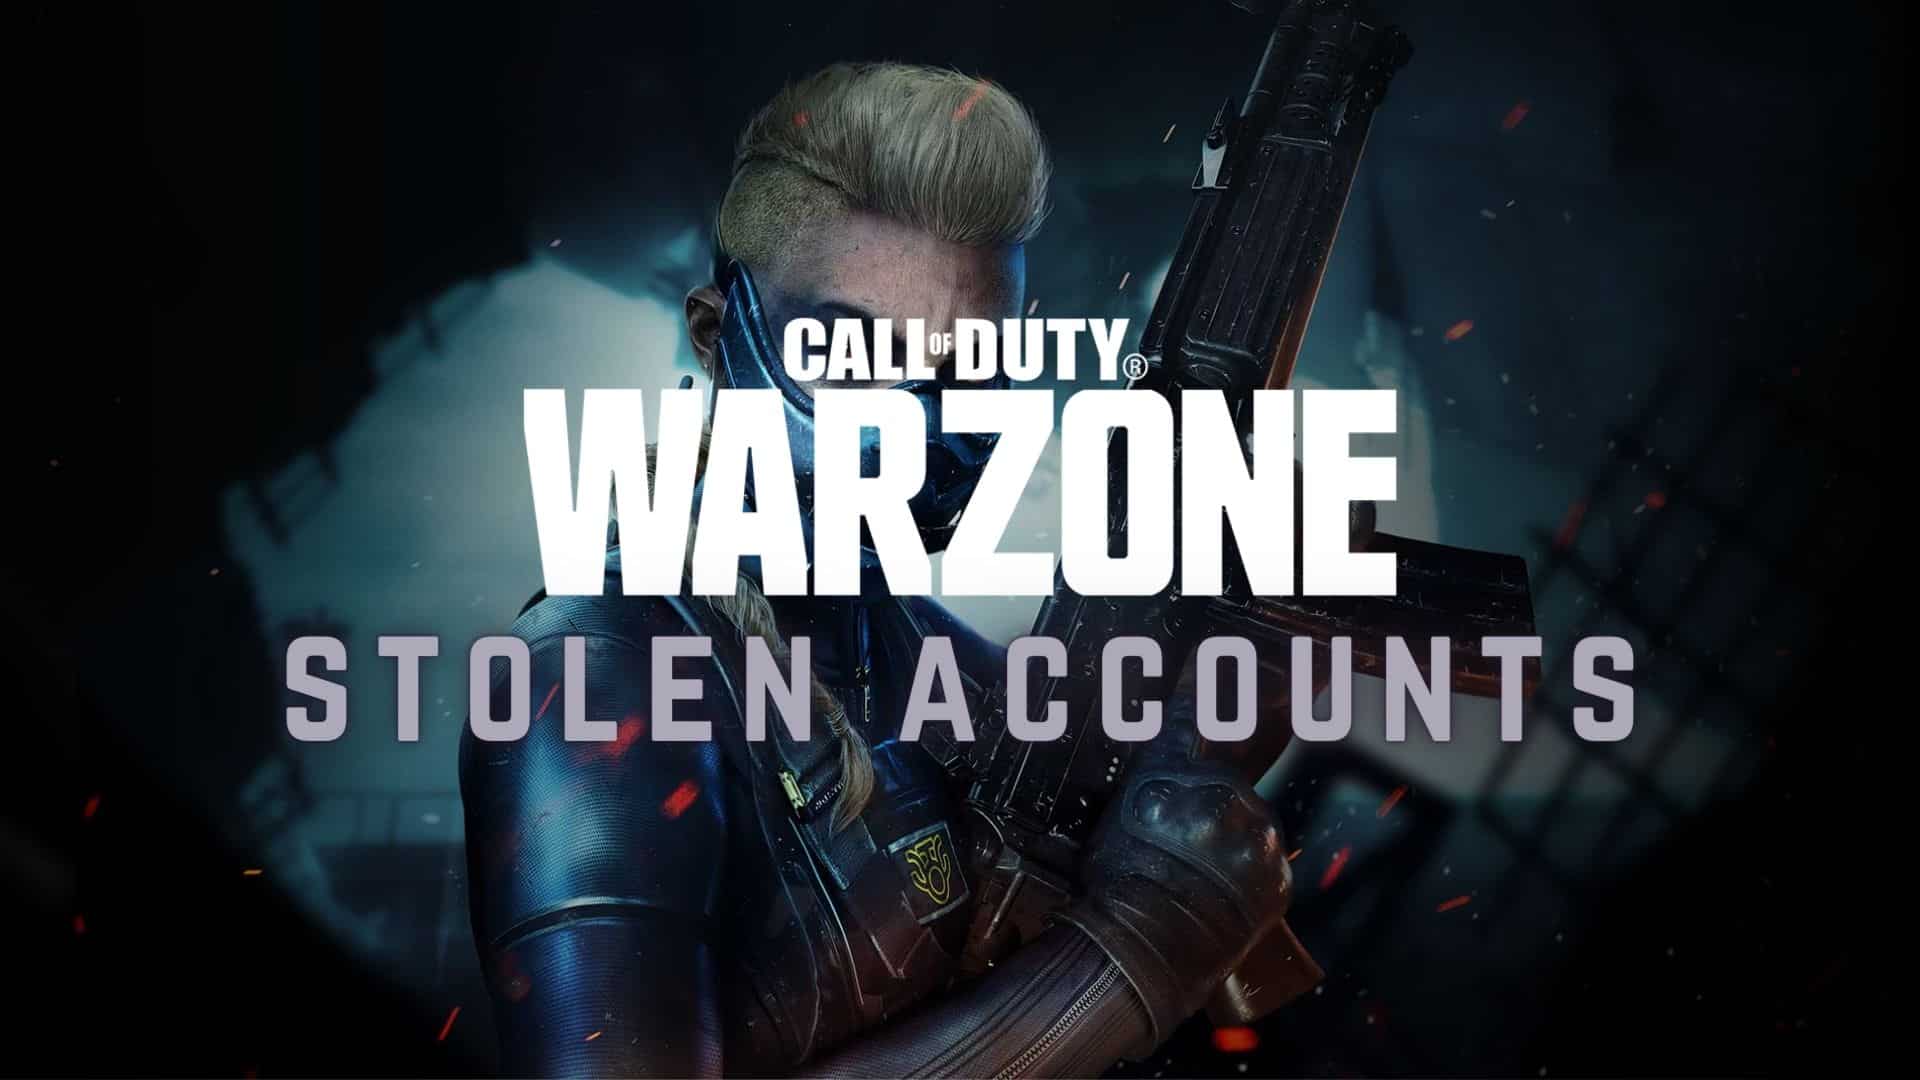 Account Security  Activision Support